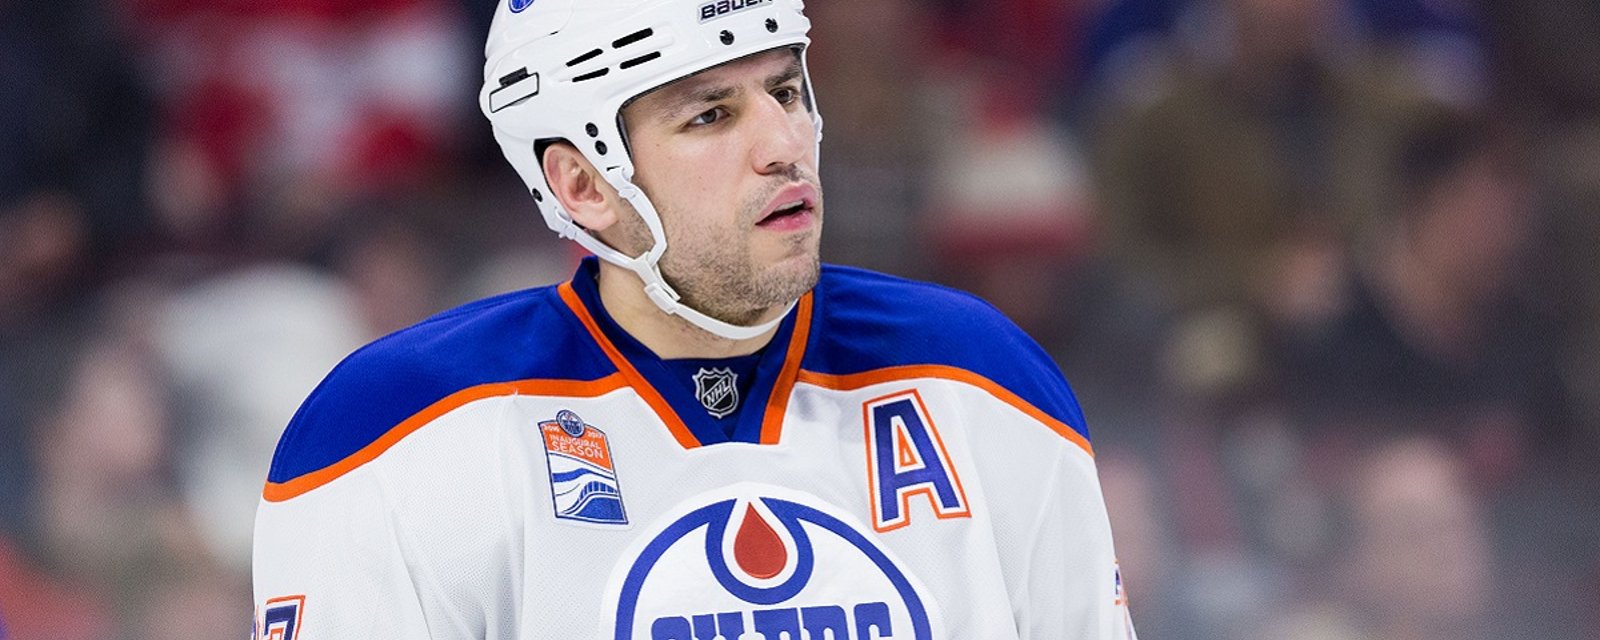 Analyst takes a damning look at this season's numbers from Milan Lucic.